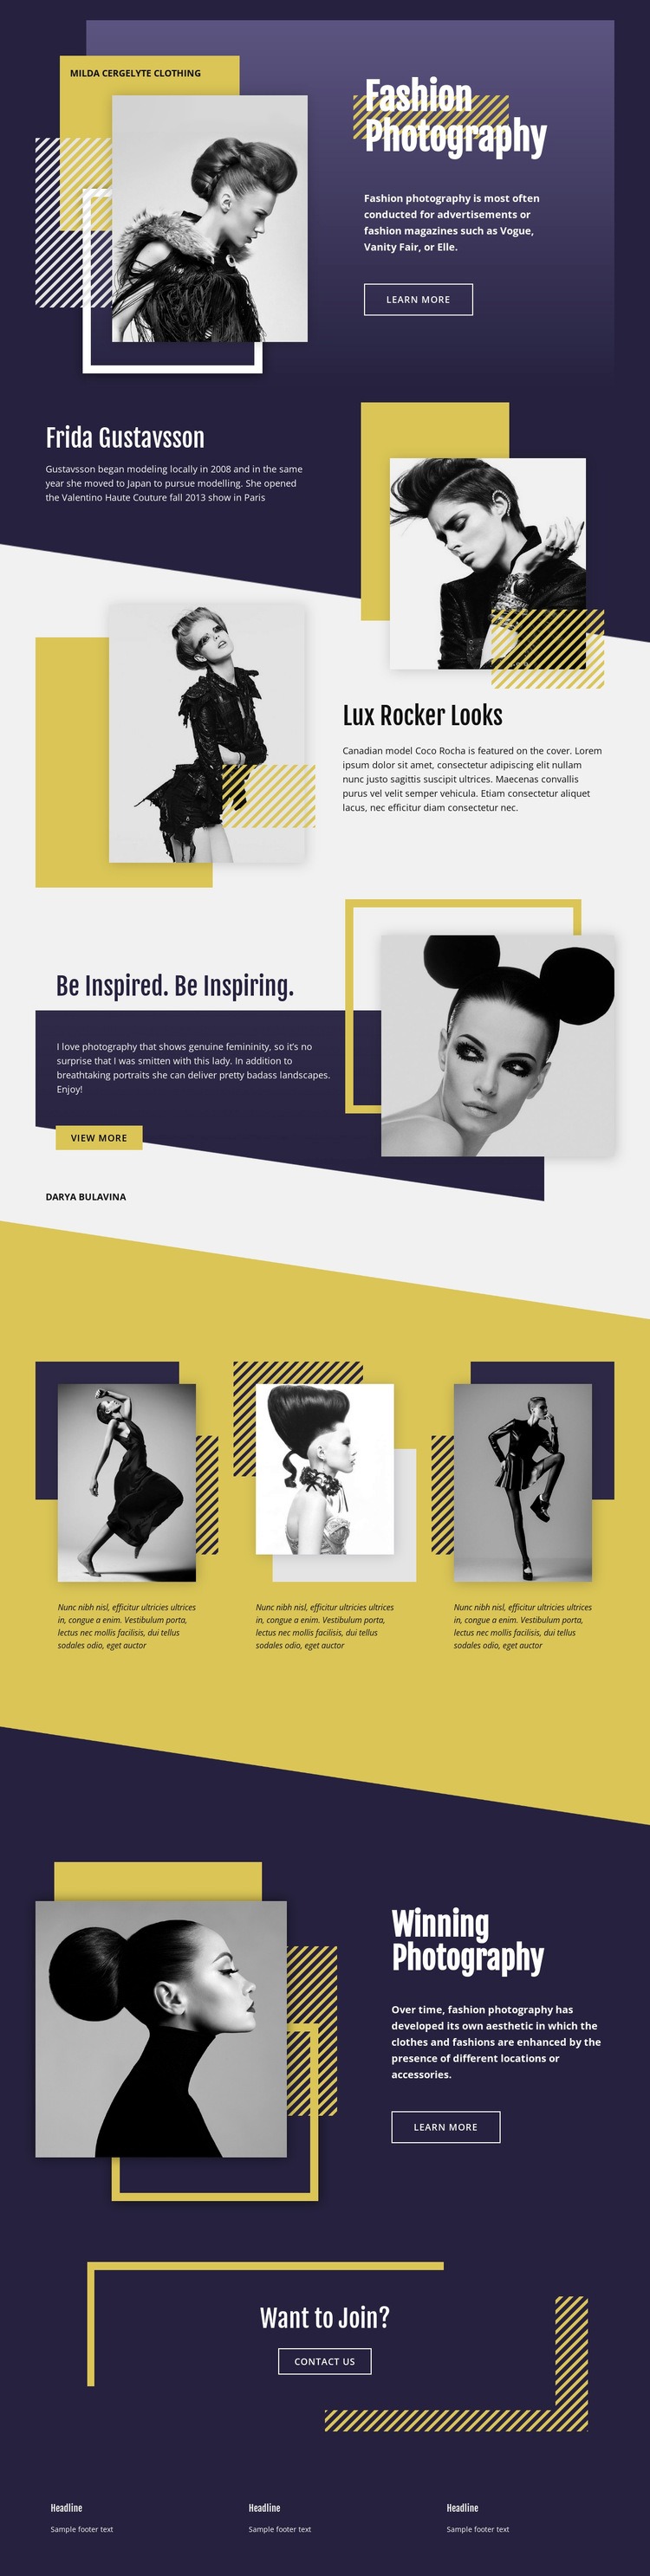 Fashion Photography Overlapping Html Code Example